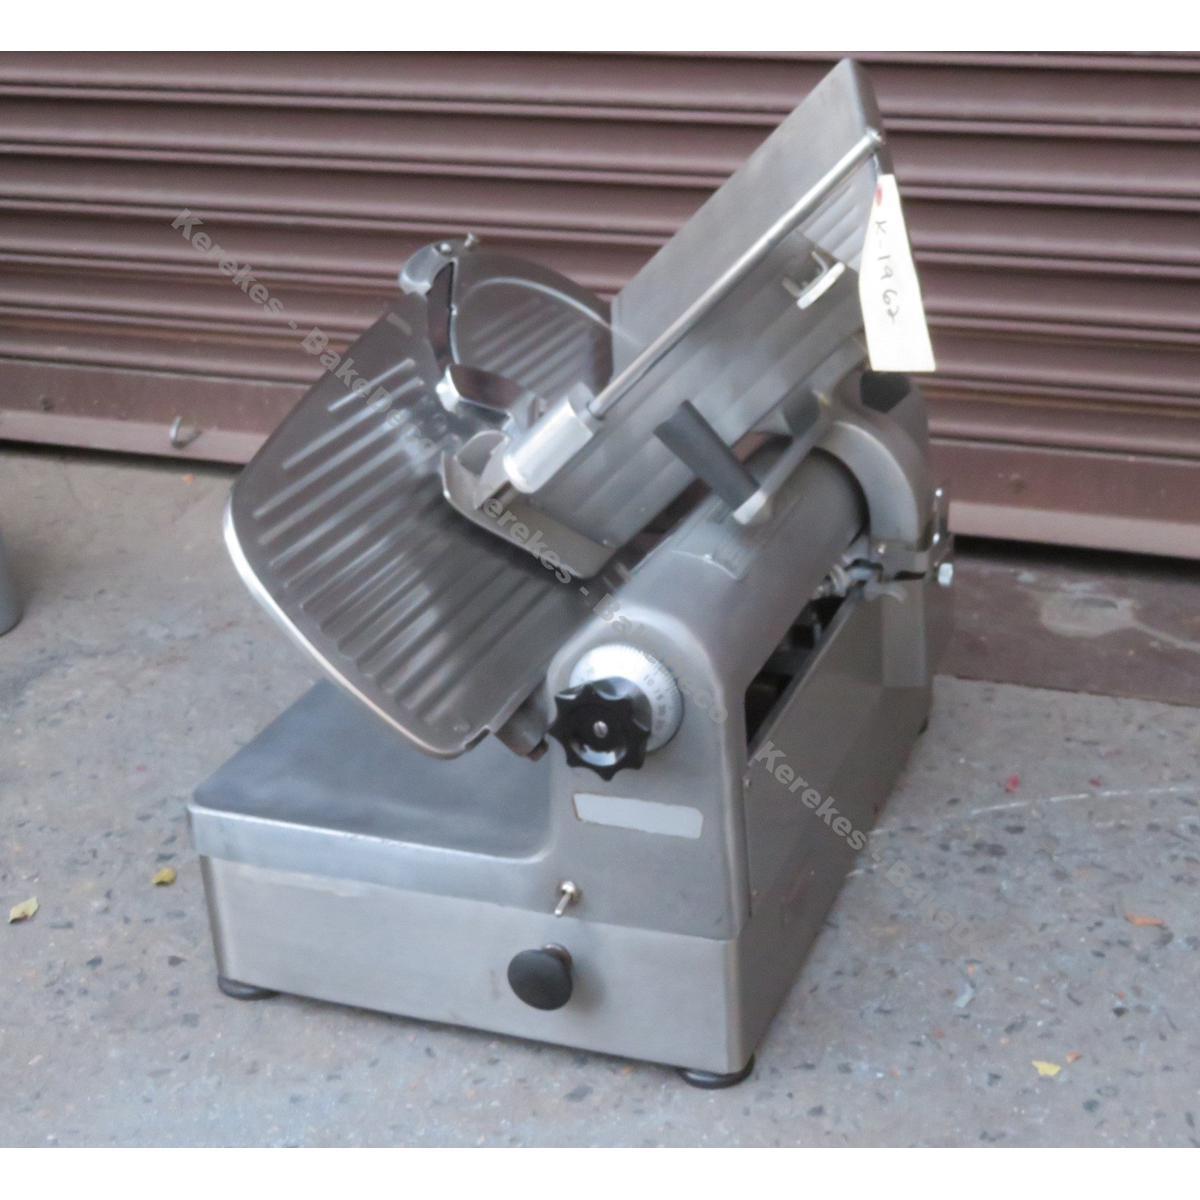 Hobart Meat Slicer 1712, Used Excellent Condition image 2